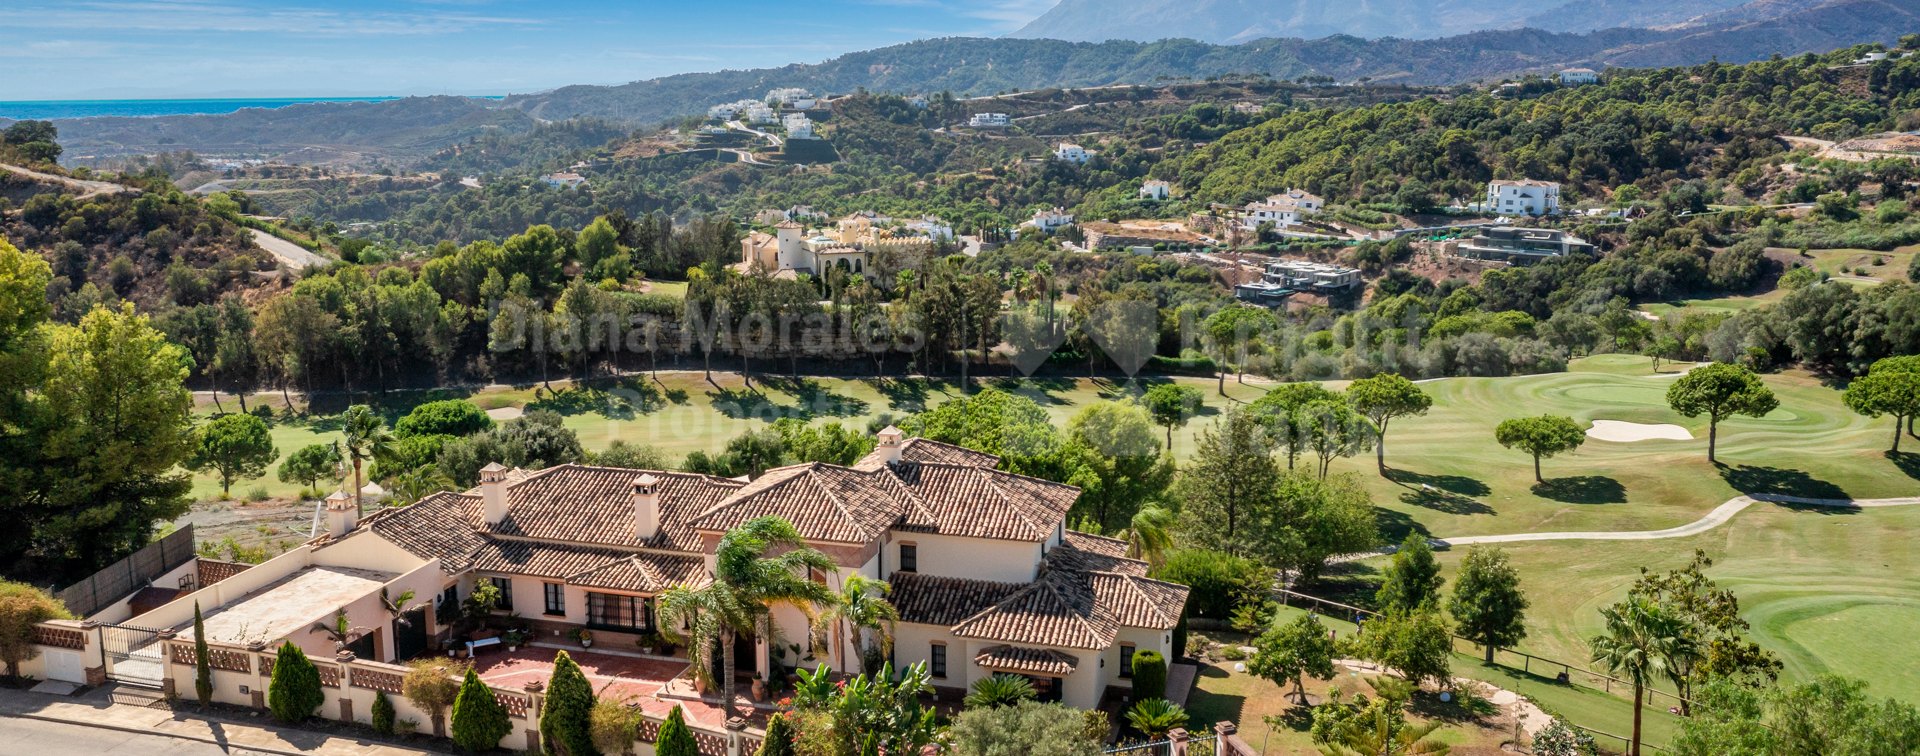 Marbella Club Golf Resort, Villa with golf, mountain and countryside views